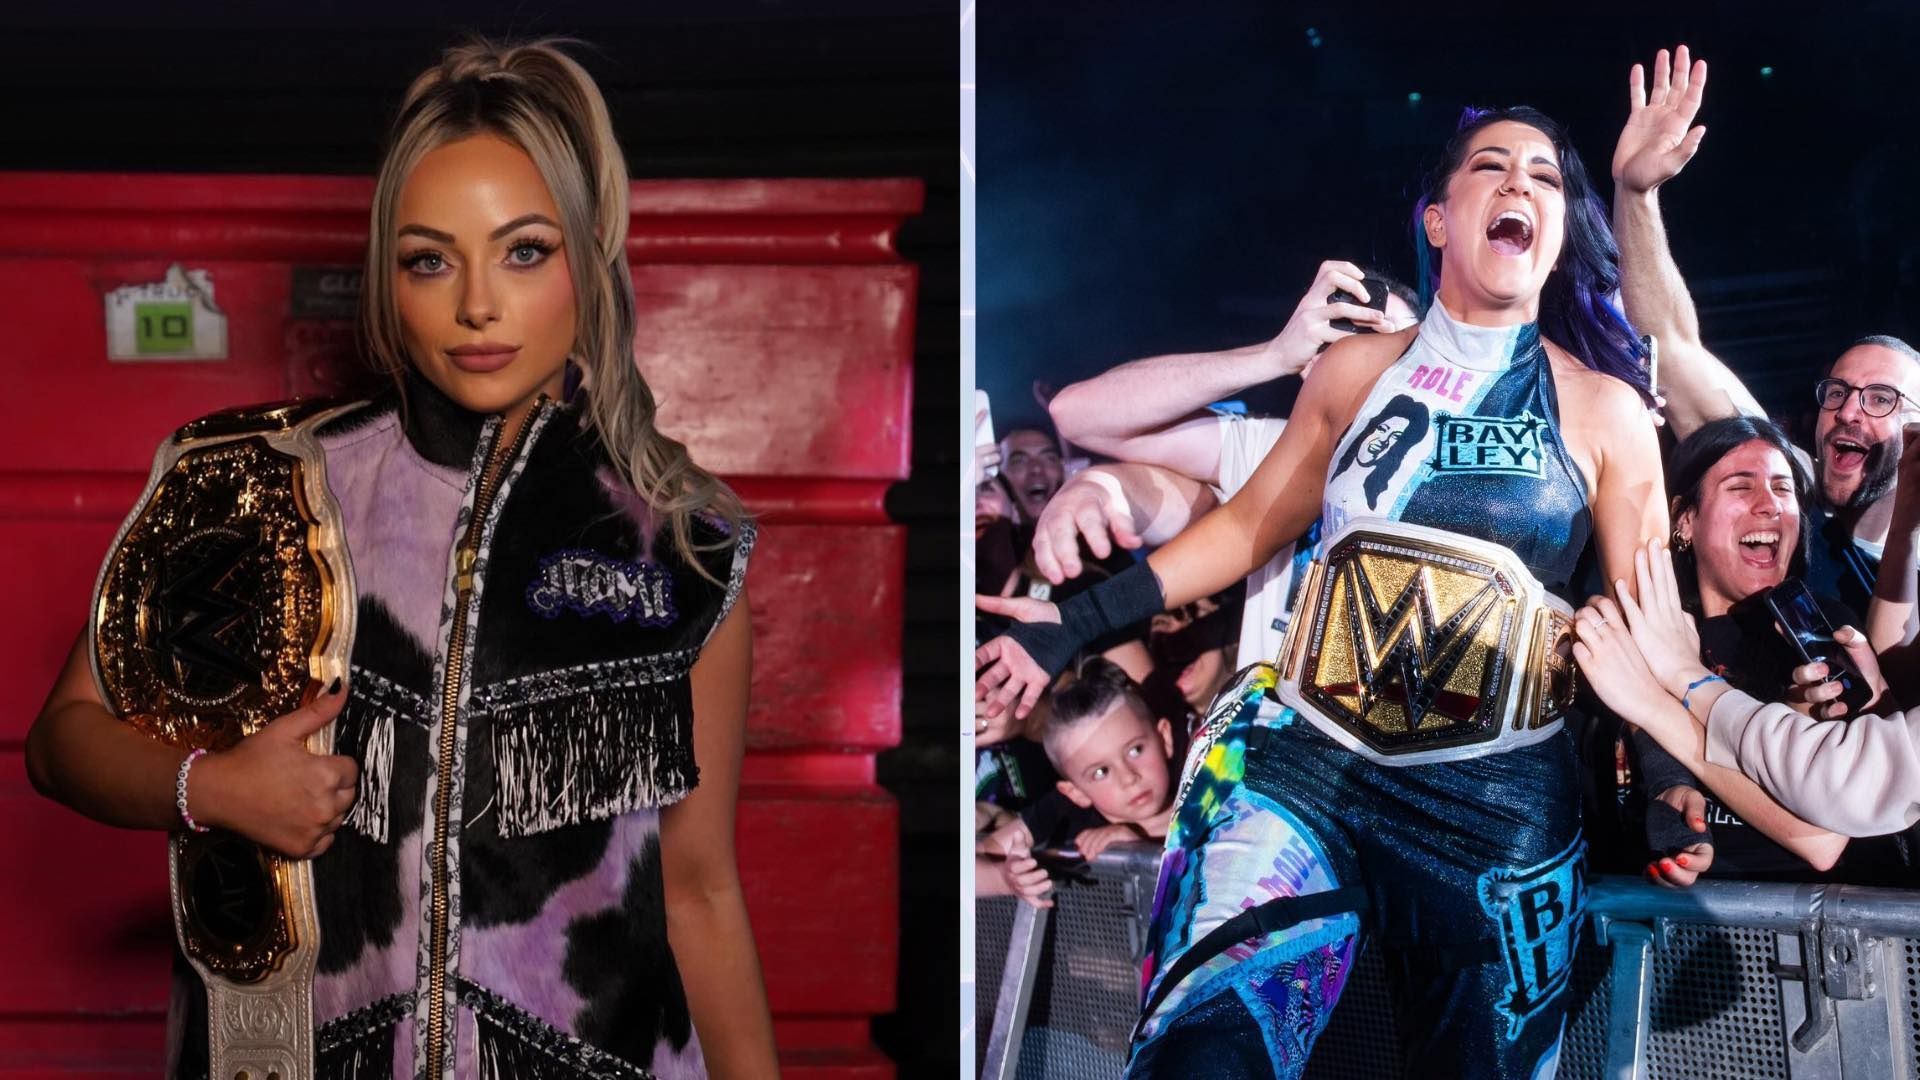 Will Liv Morgan and Bayley make it to SummerSlam with their titles?